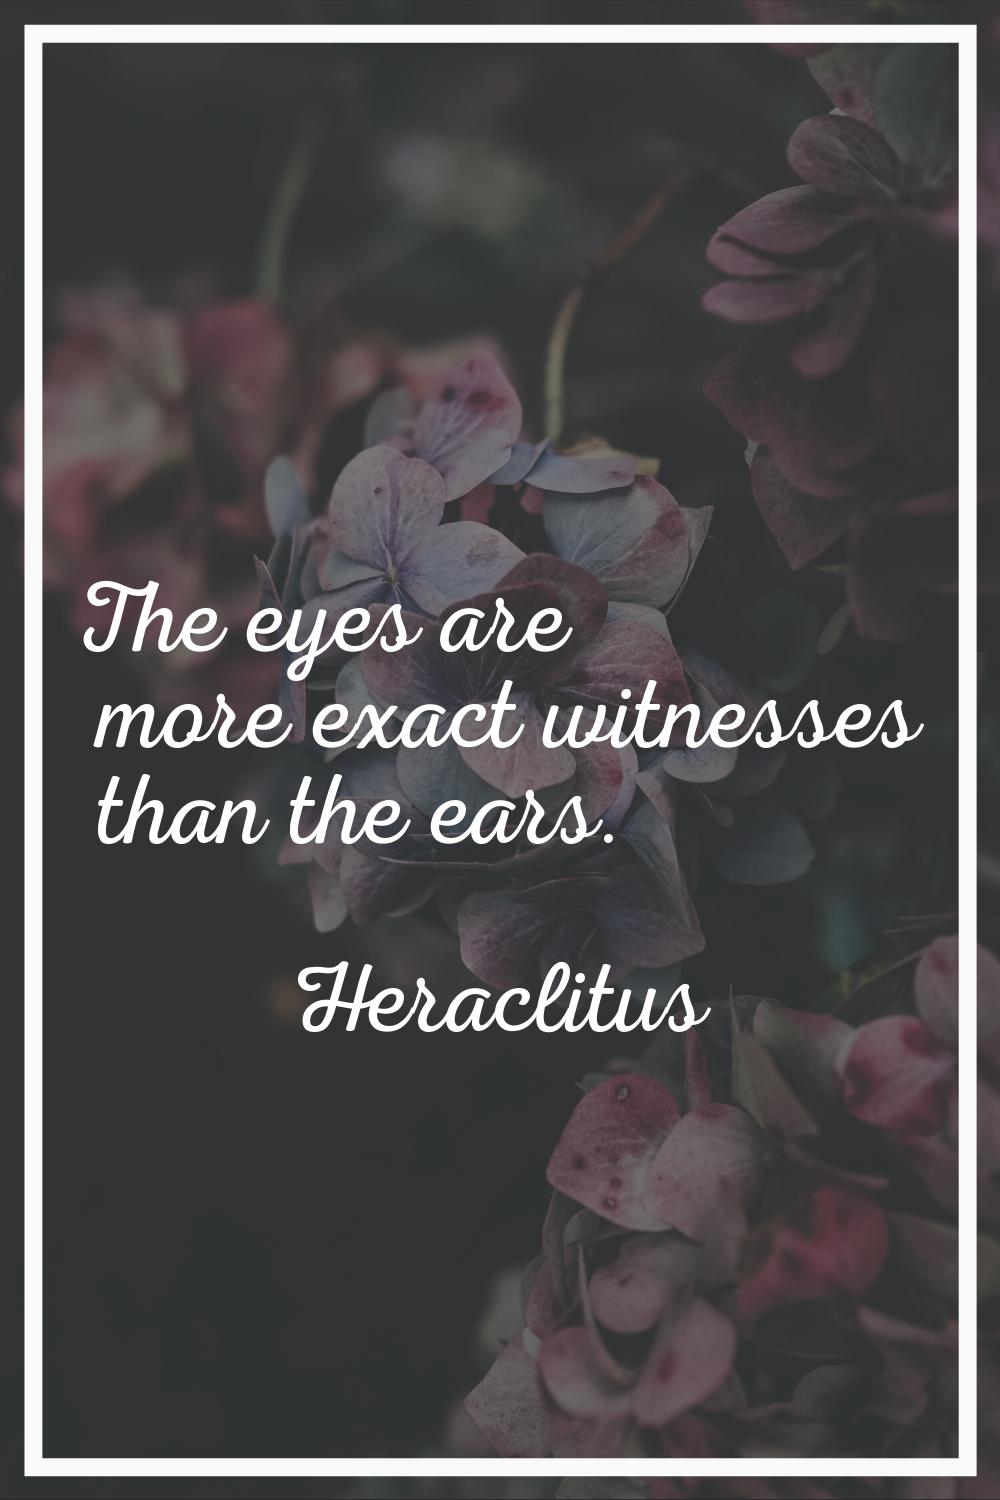 The eyes are more exact witnesses than the ears.